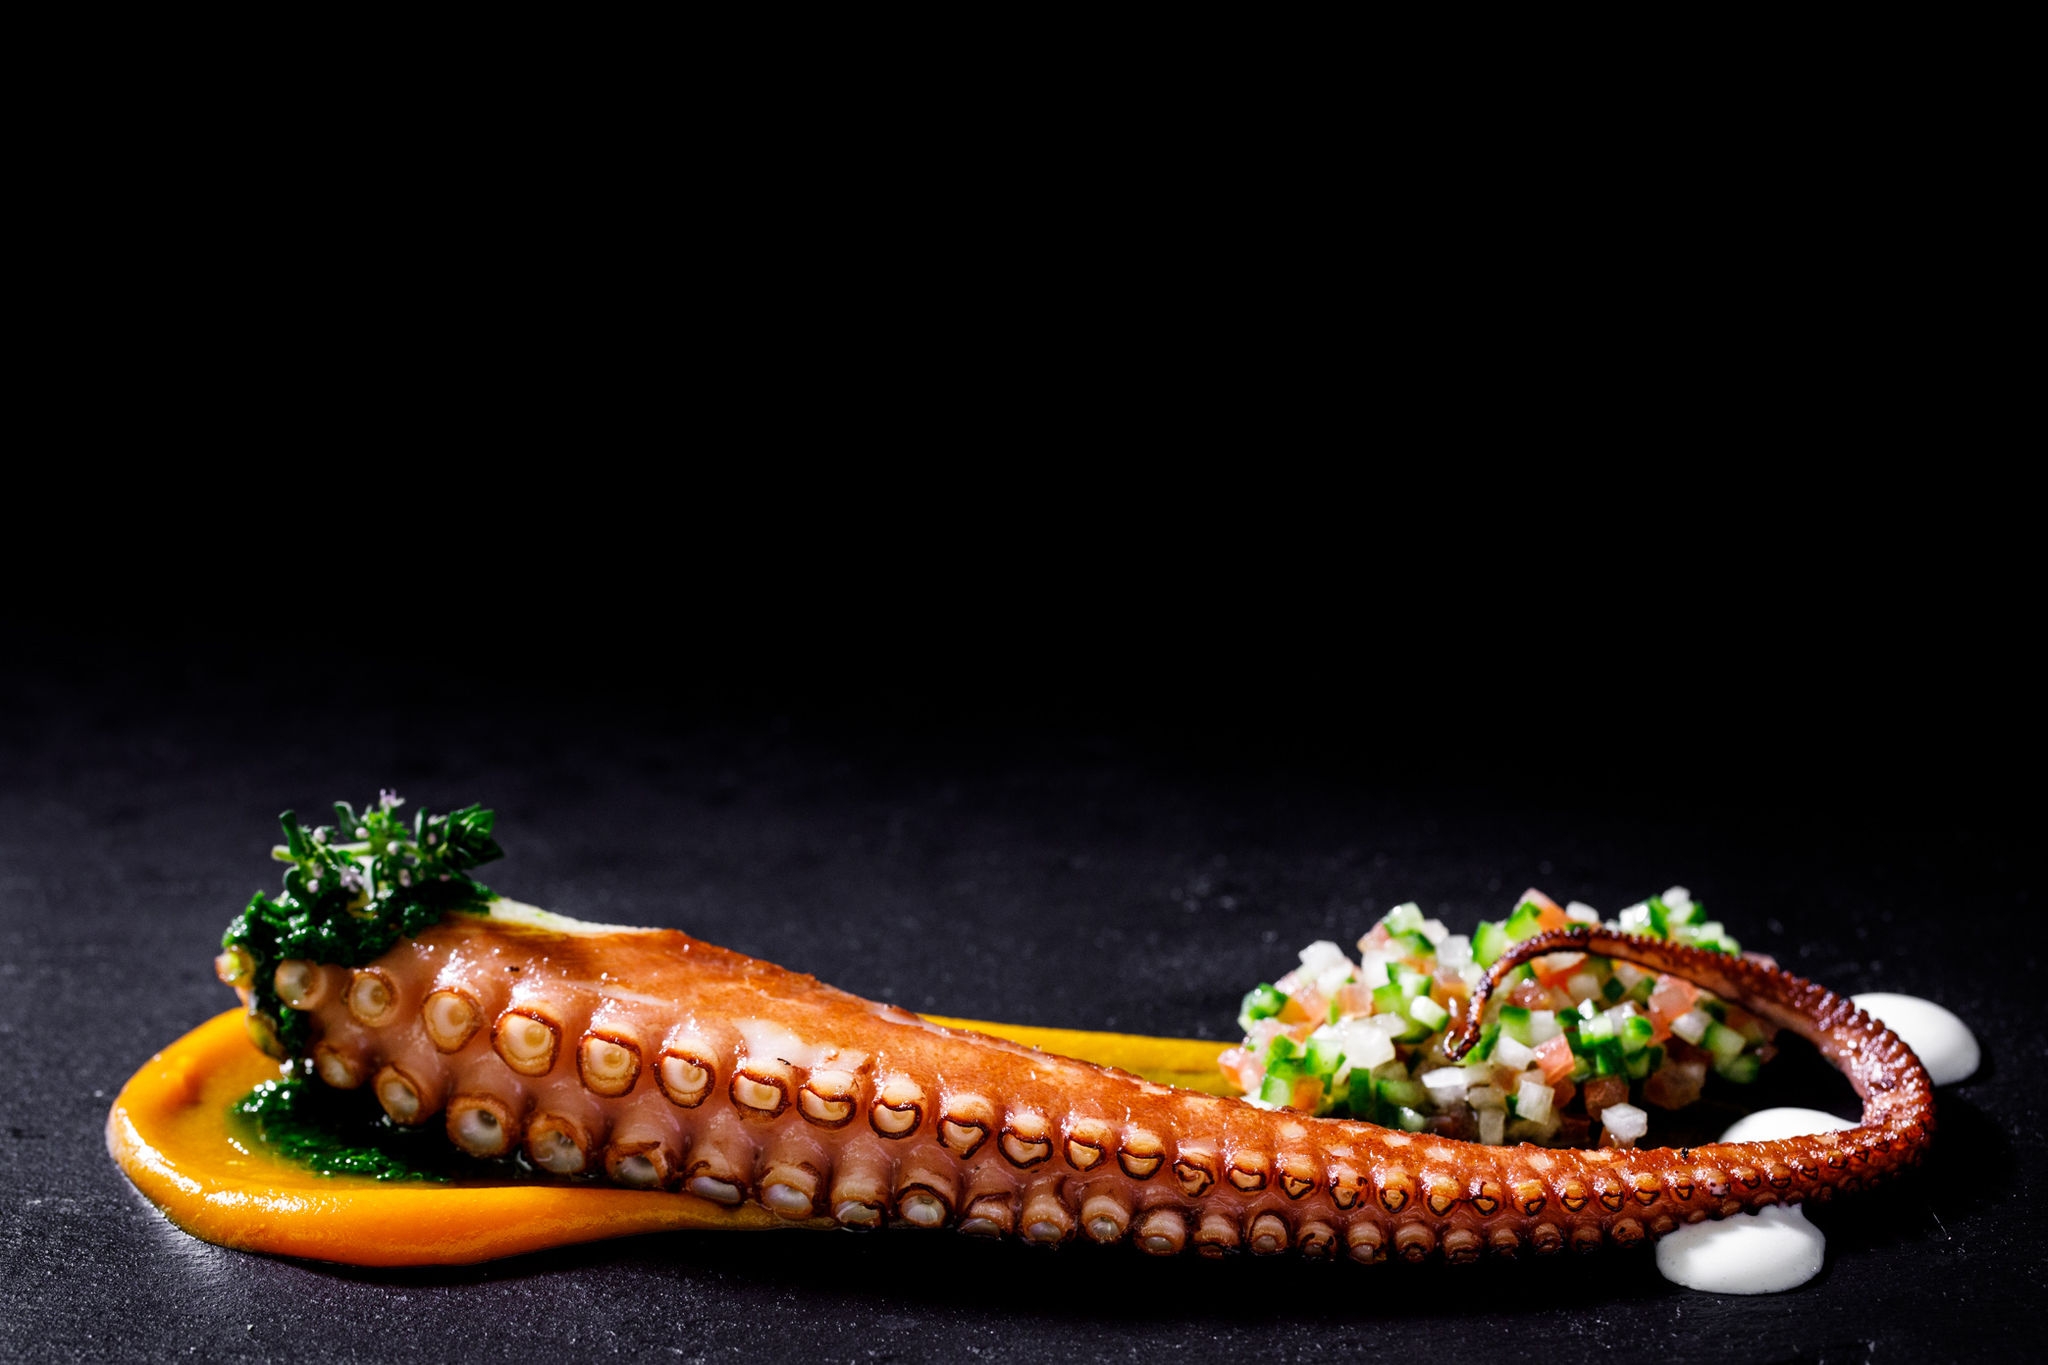 A cooked octopus tentacle with a mini side salad.